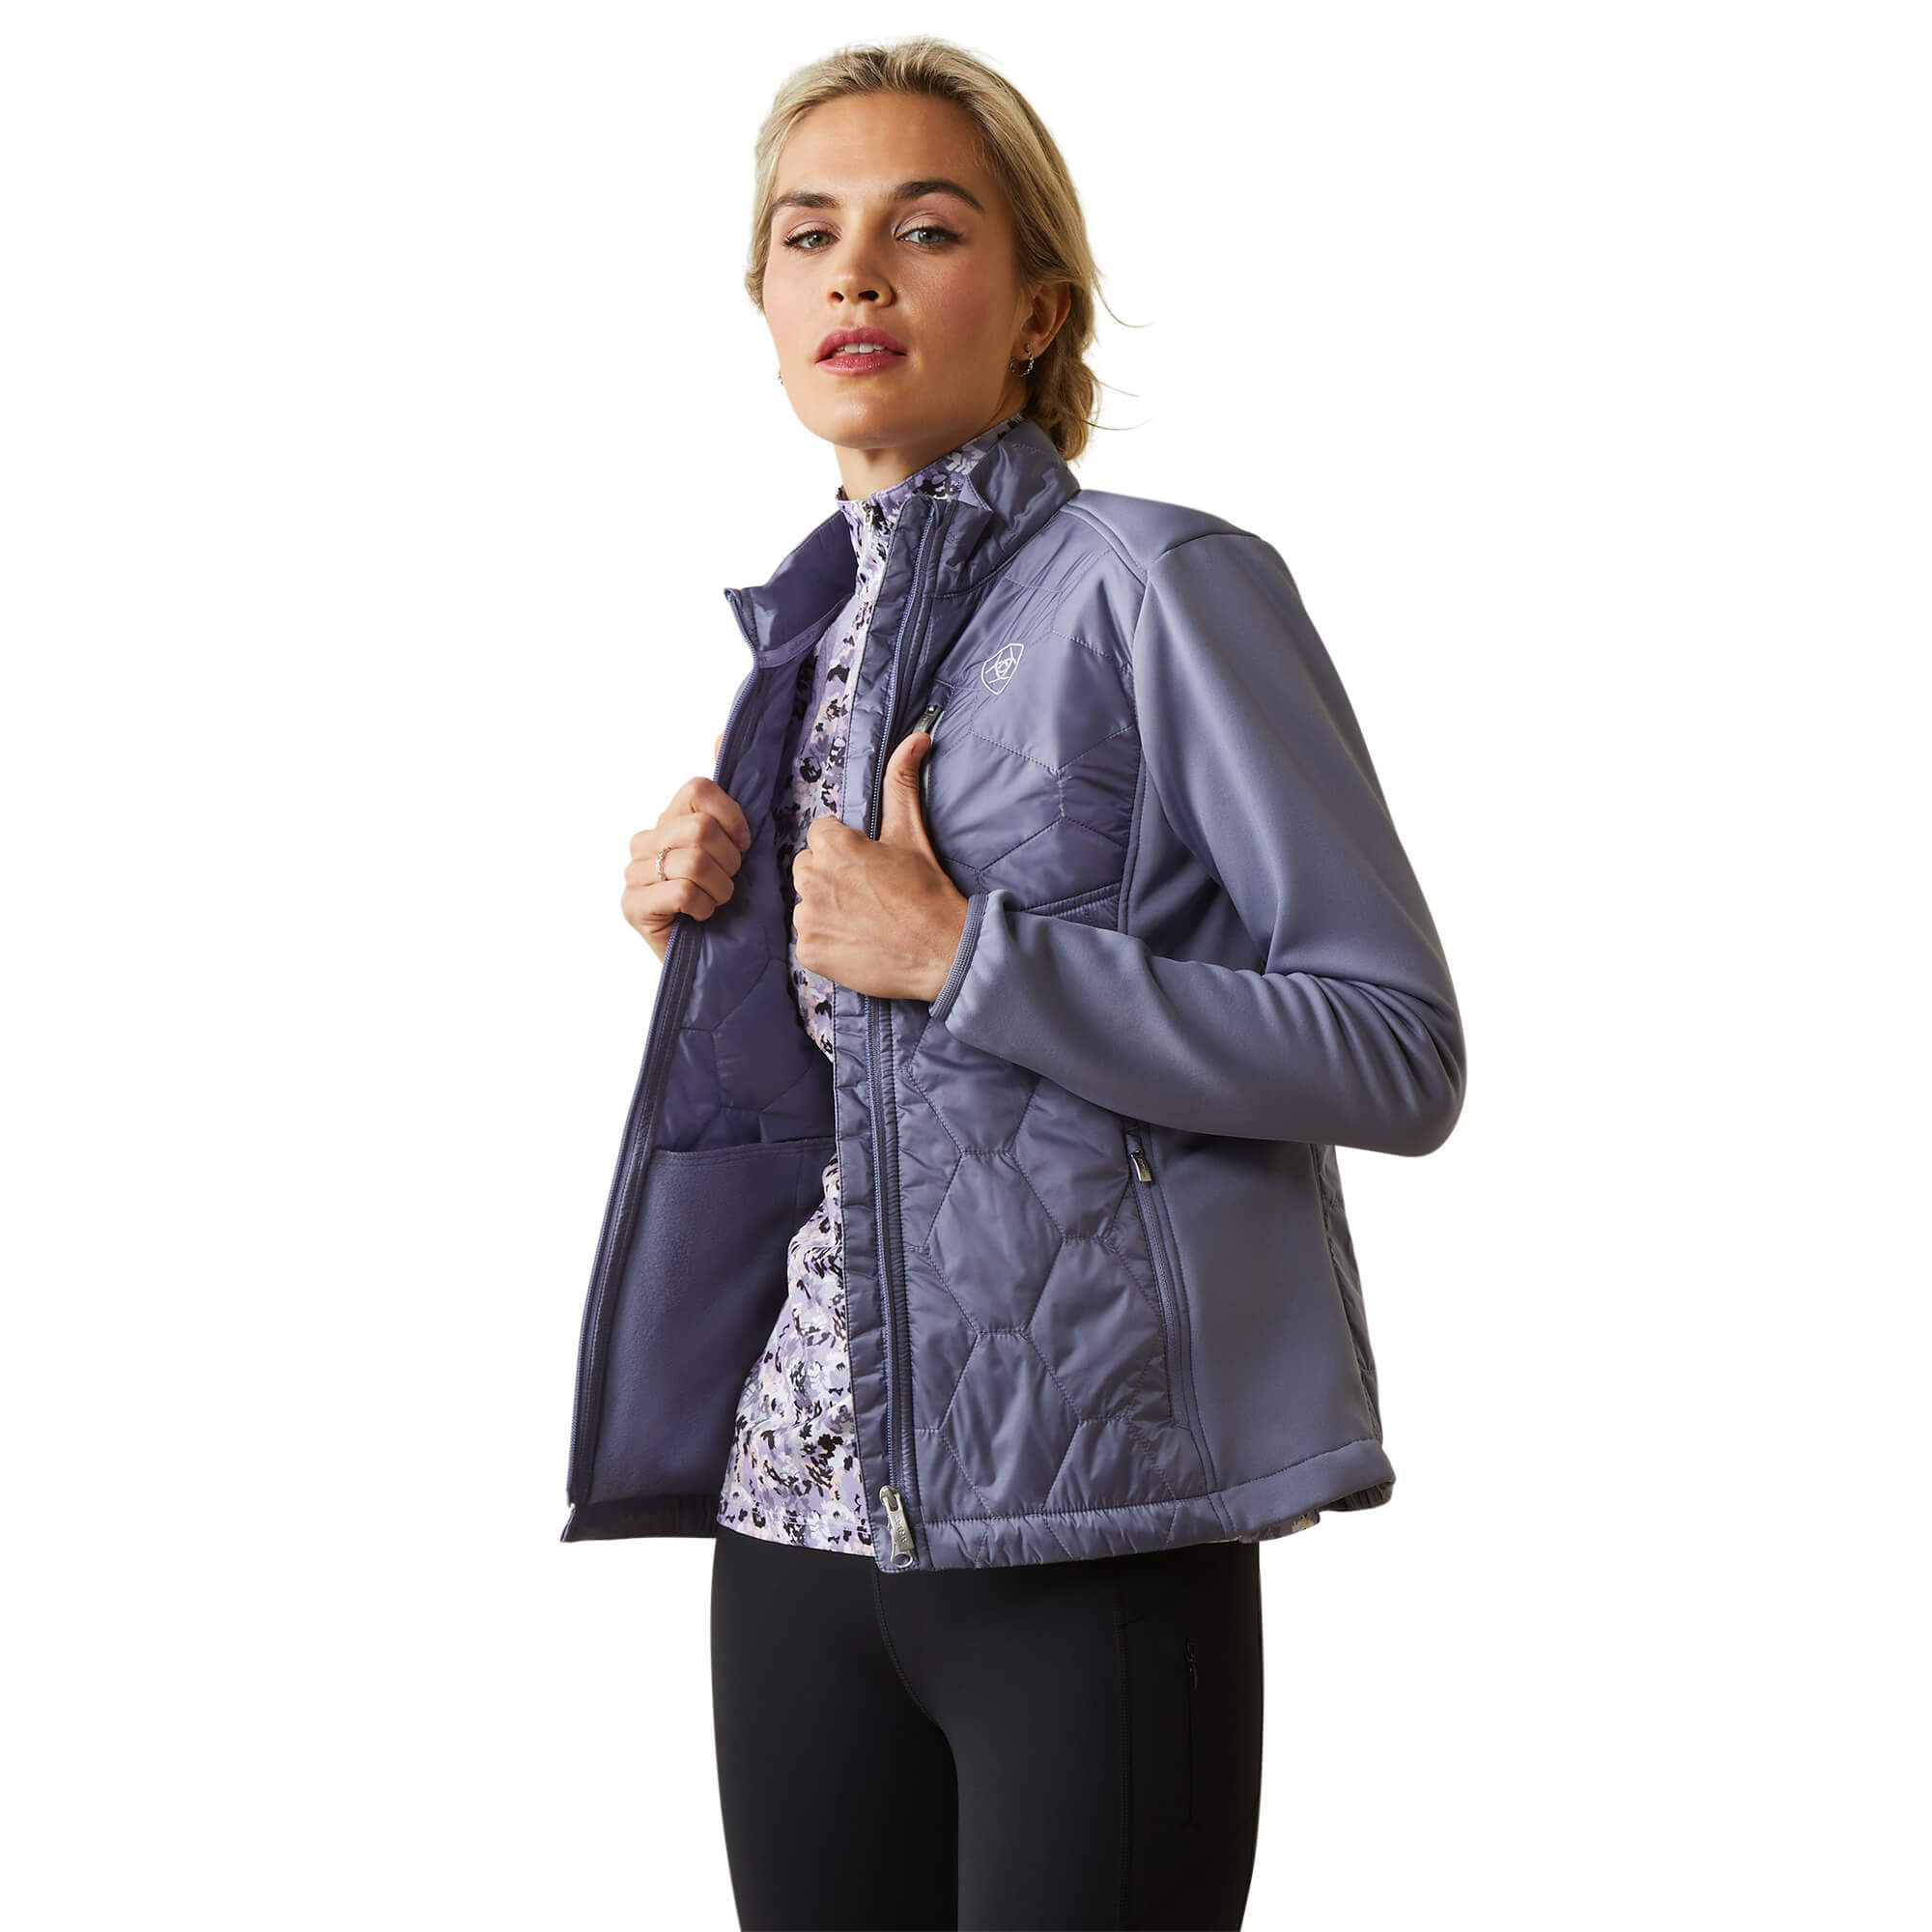 Featured image for “Ariat Fusion Insulated Jacket”